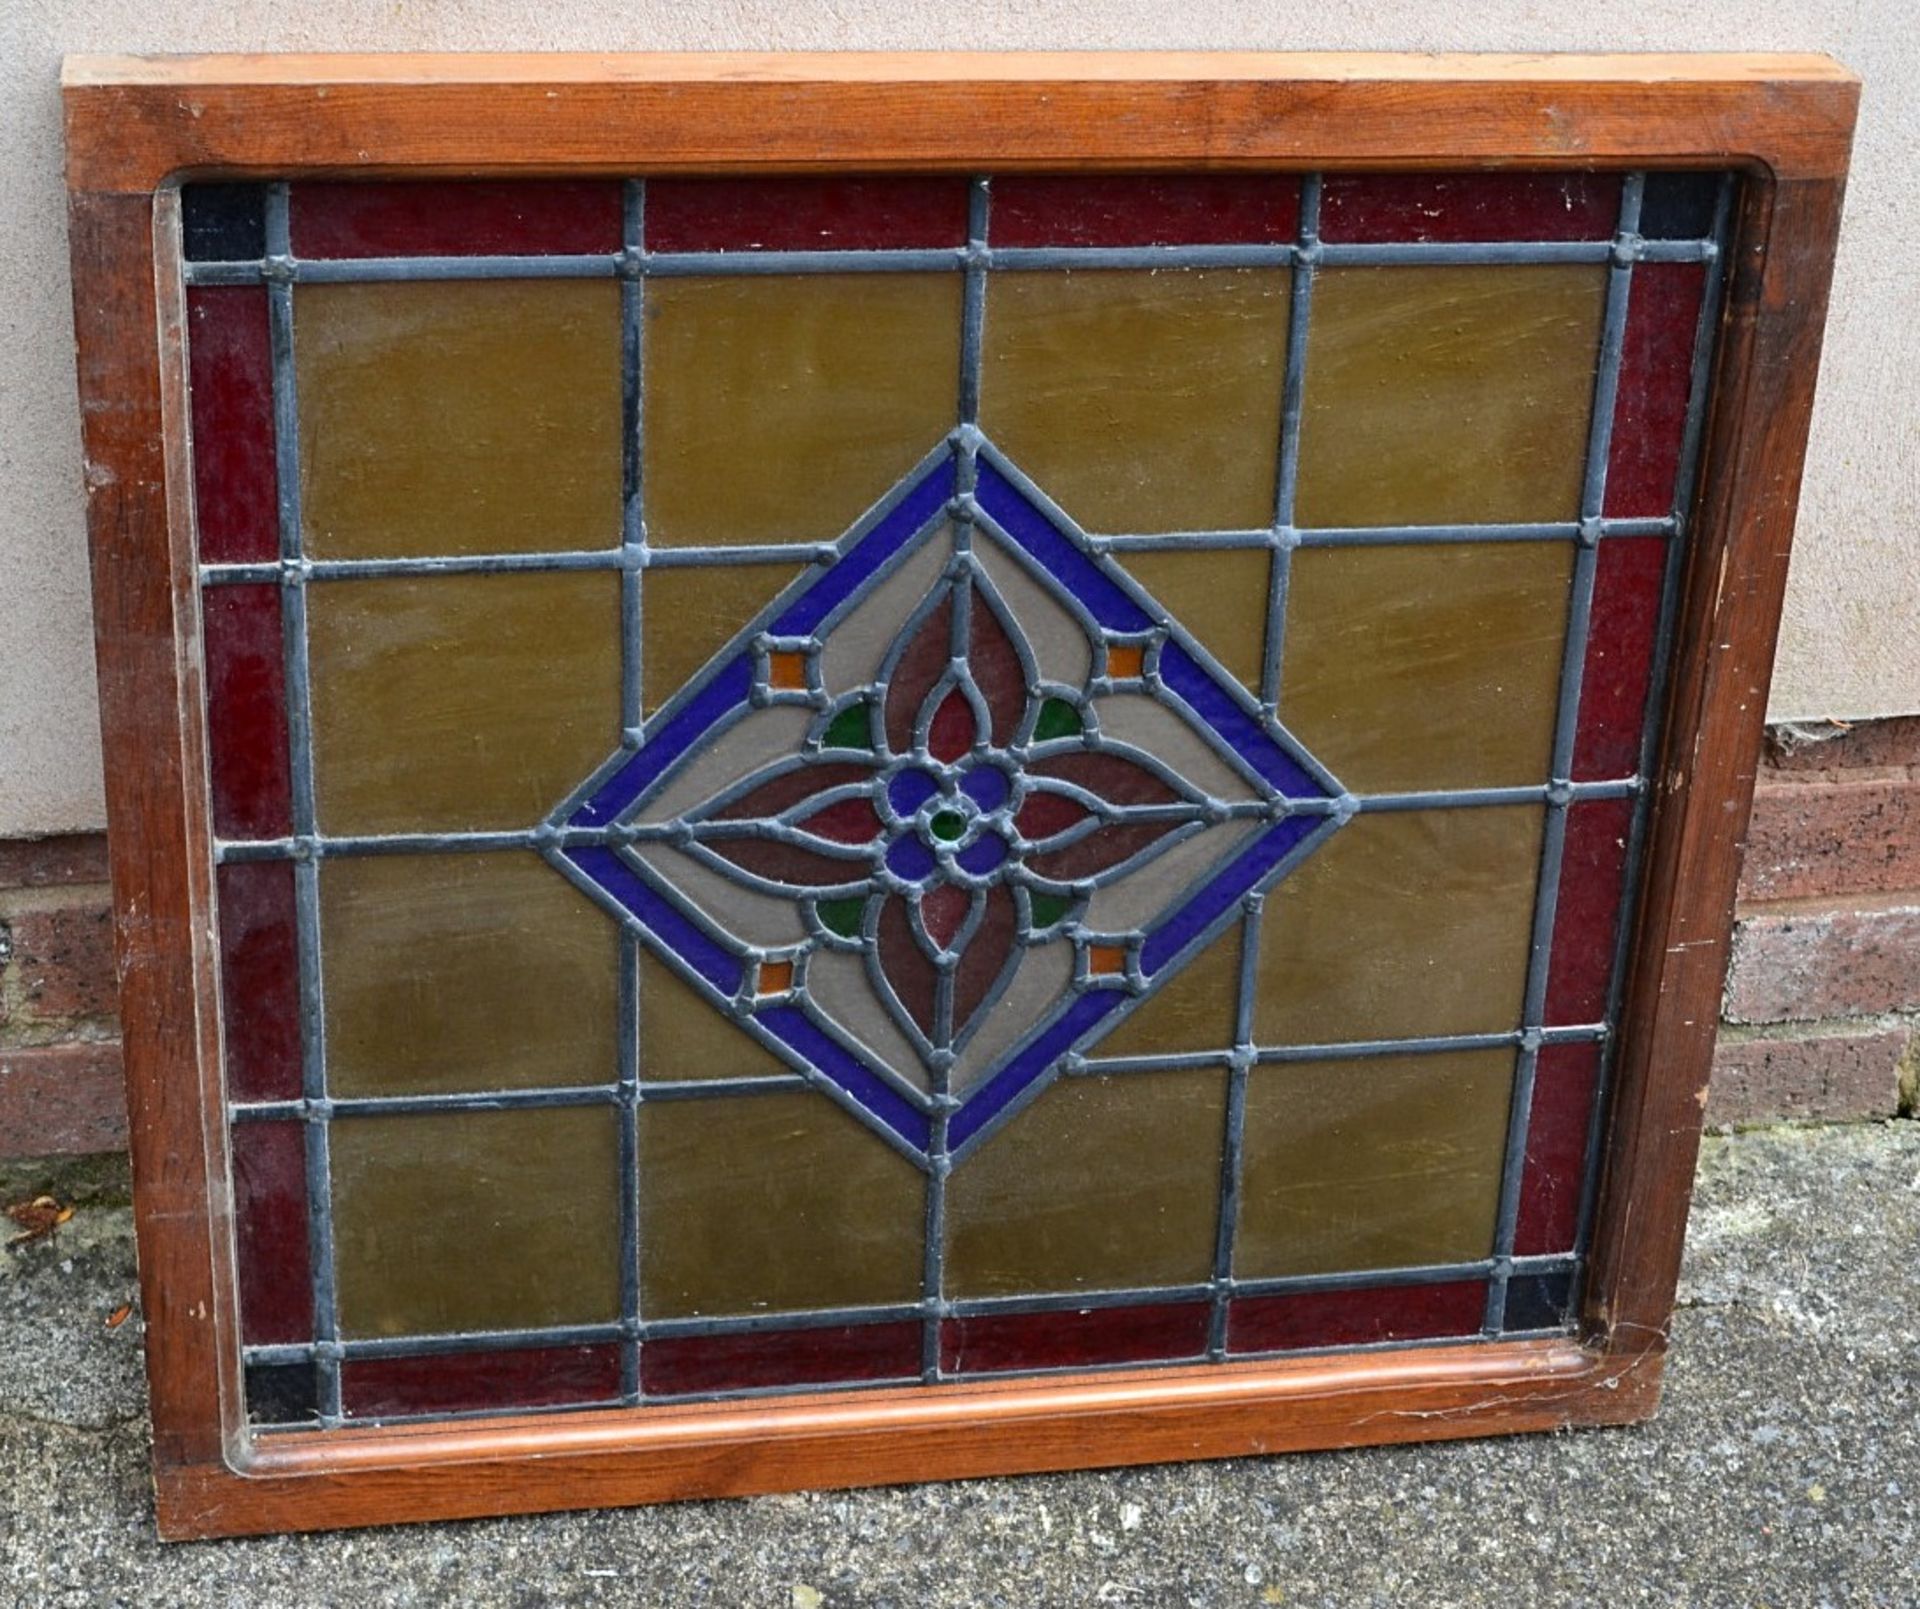 1 x Stain Glass Window In Square Wooden Frame - Dimensions: 64 x 65.5cm - Ref: KH207 / SHD - CL168 - - Image 3 of 3